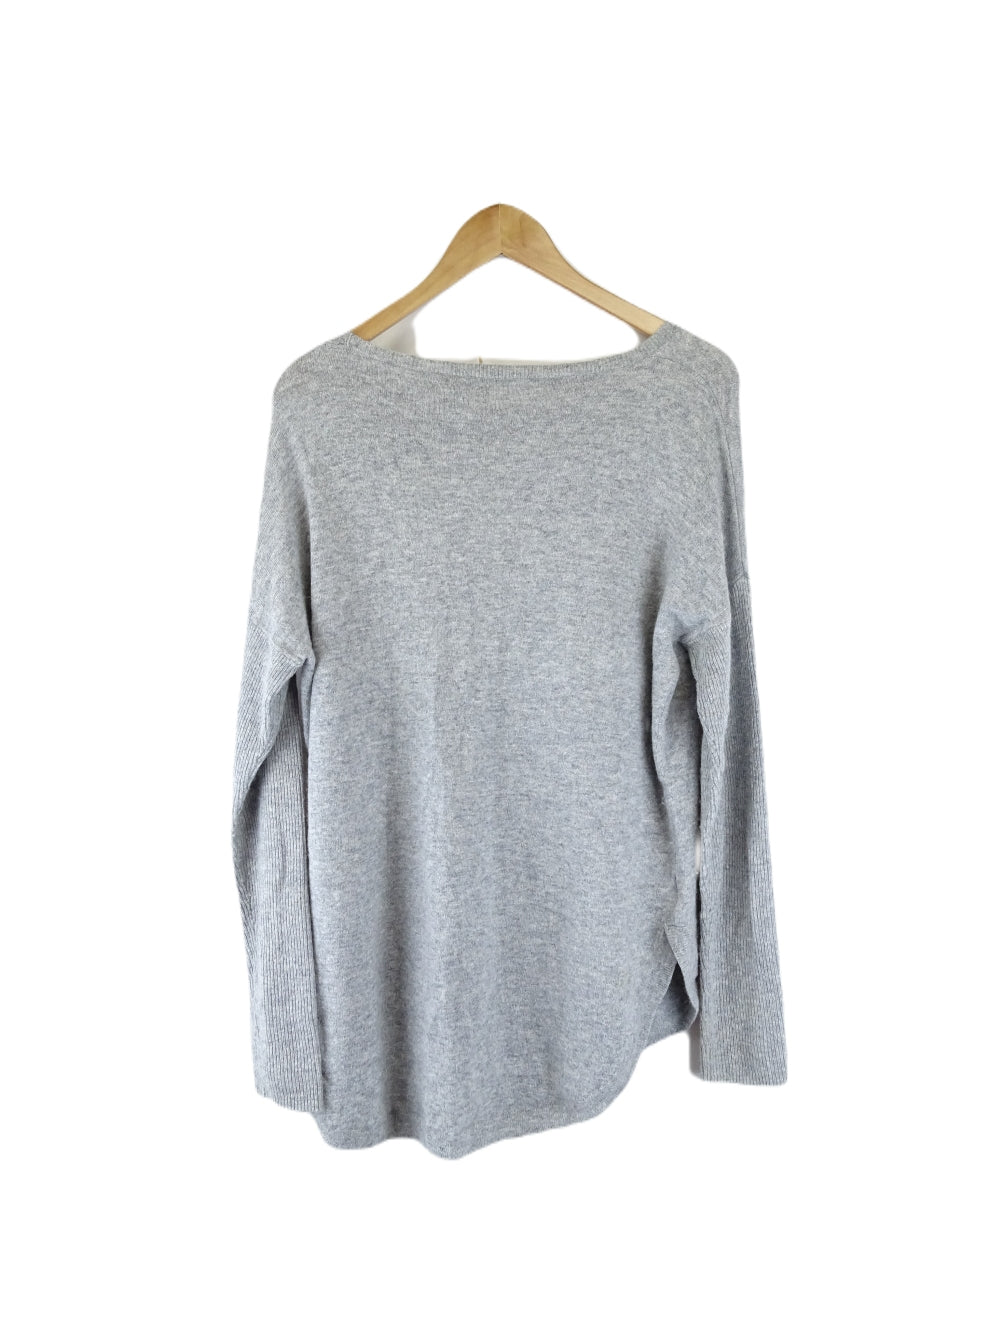 Country Road Grey Jumper L